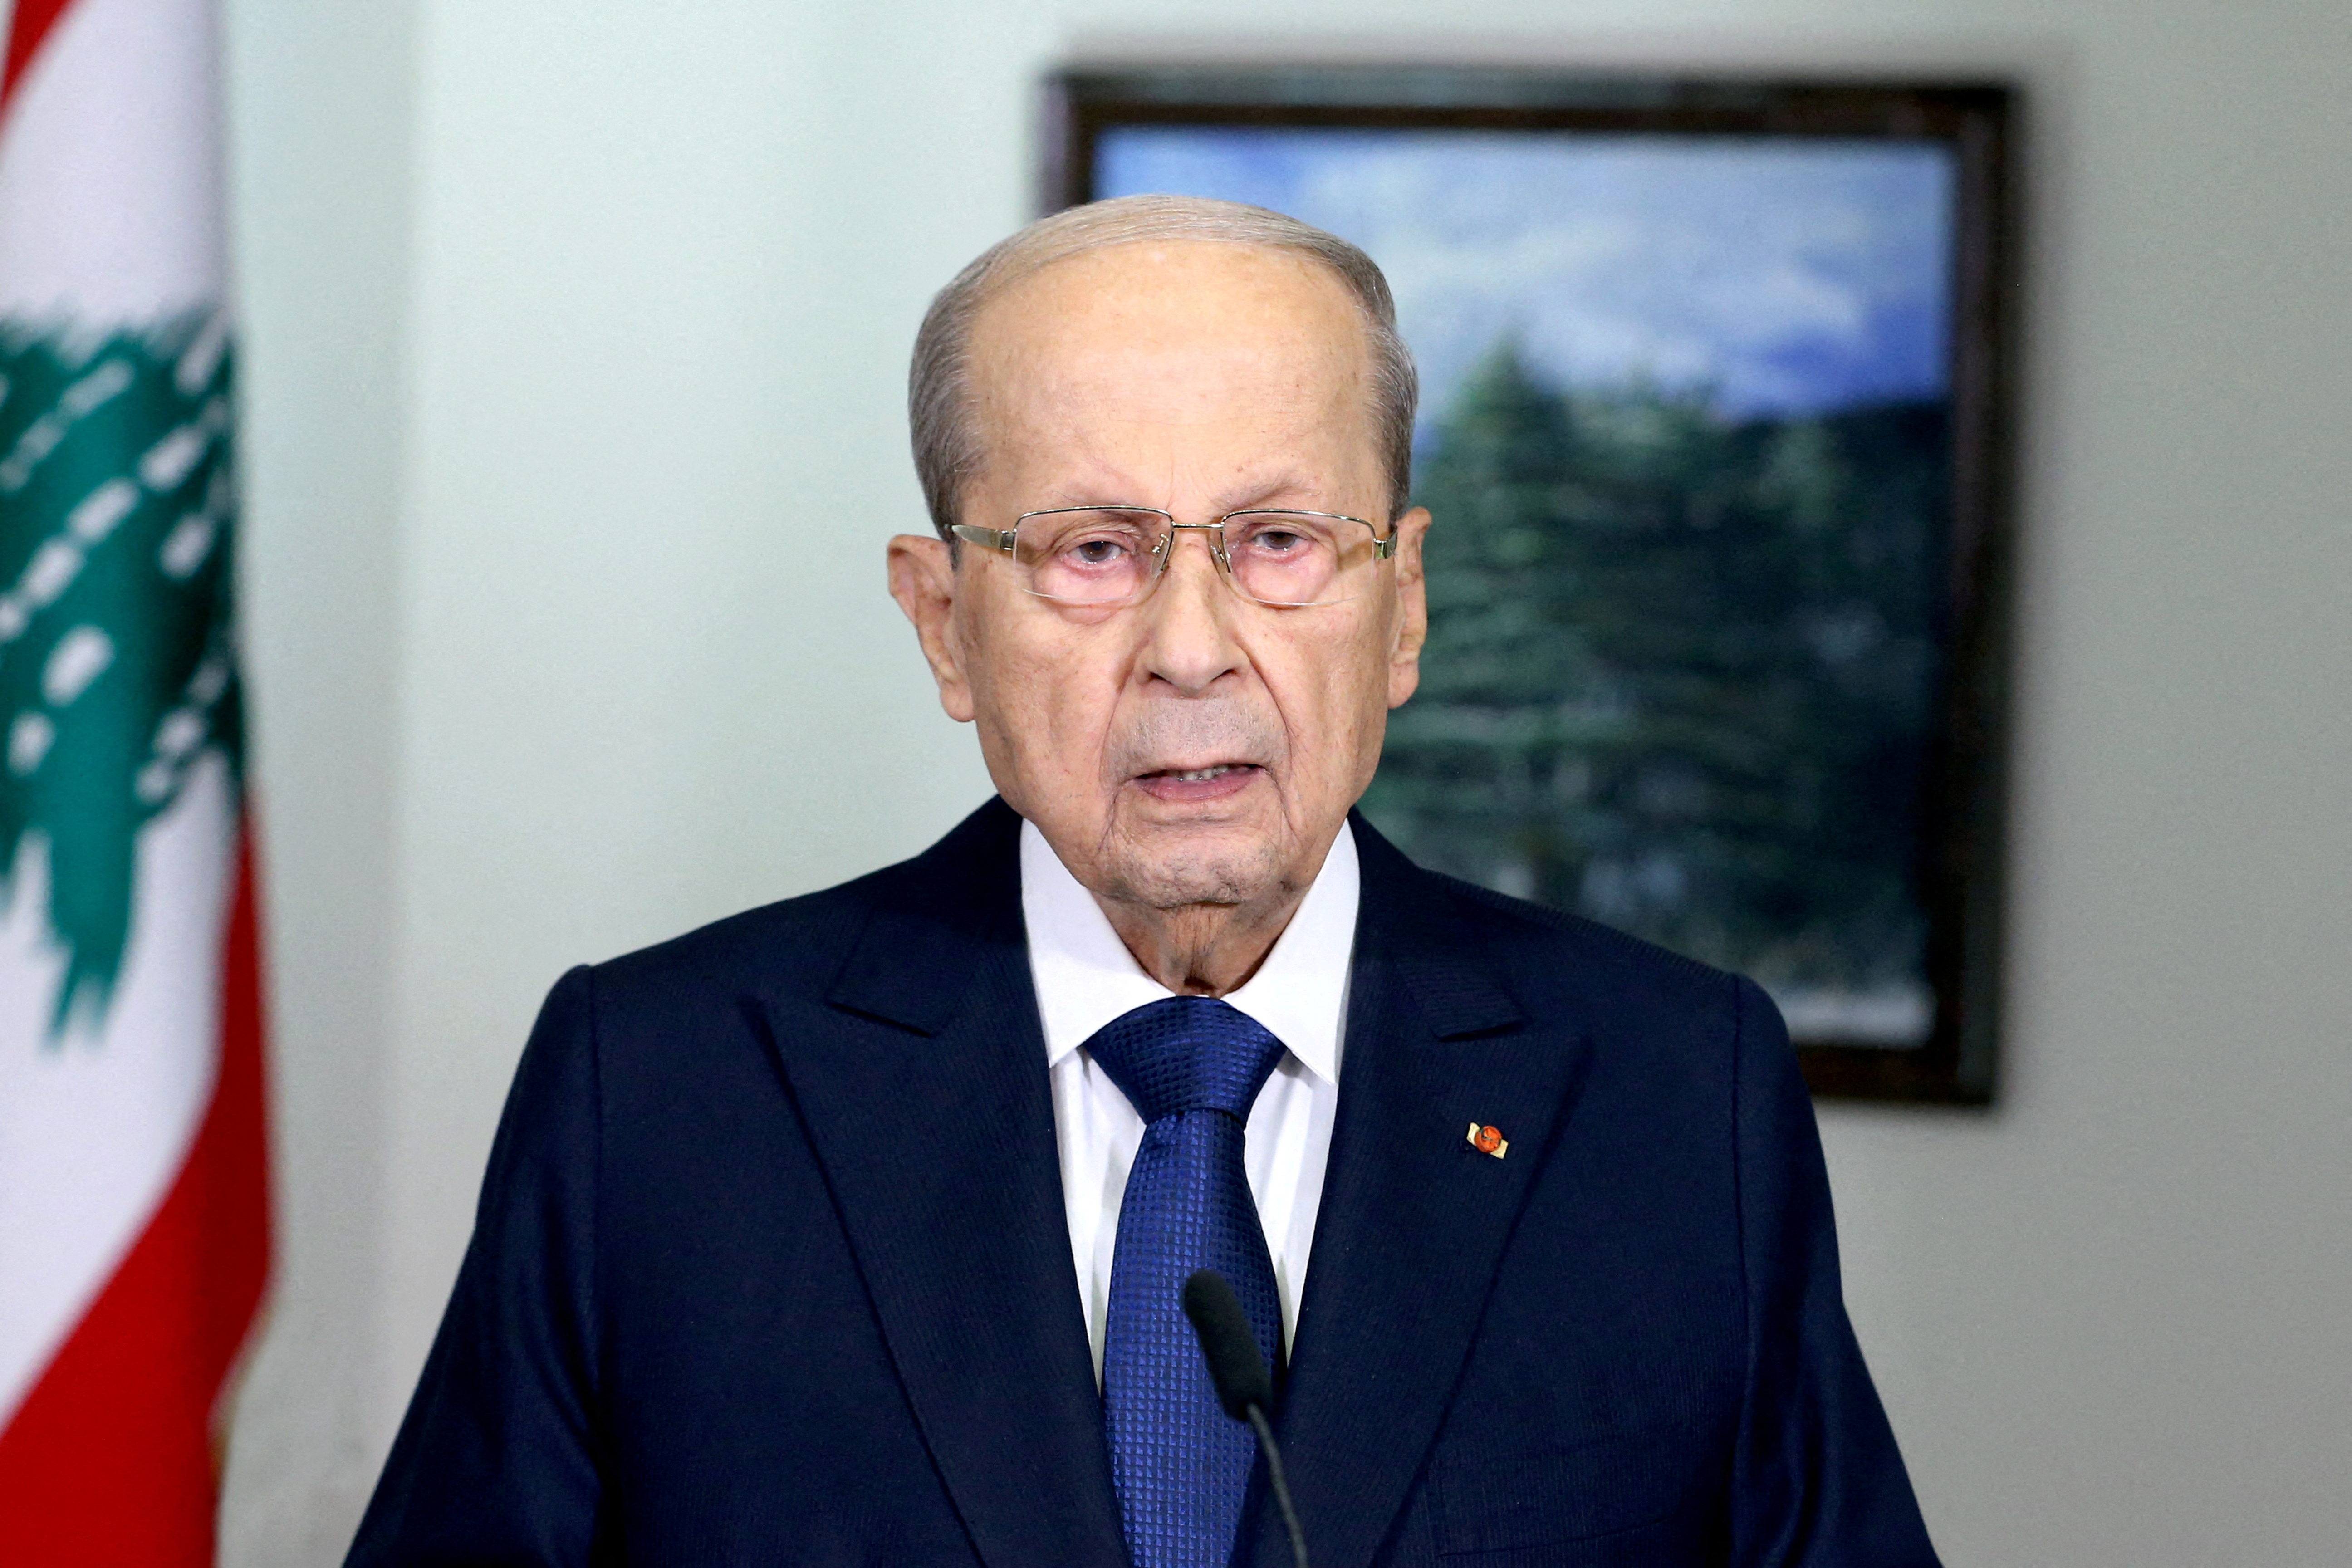 Lebanon's President Michel Aoun addresses the nation from the presidential palace in Baabda